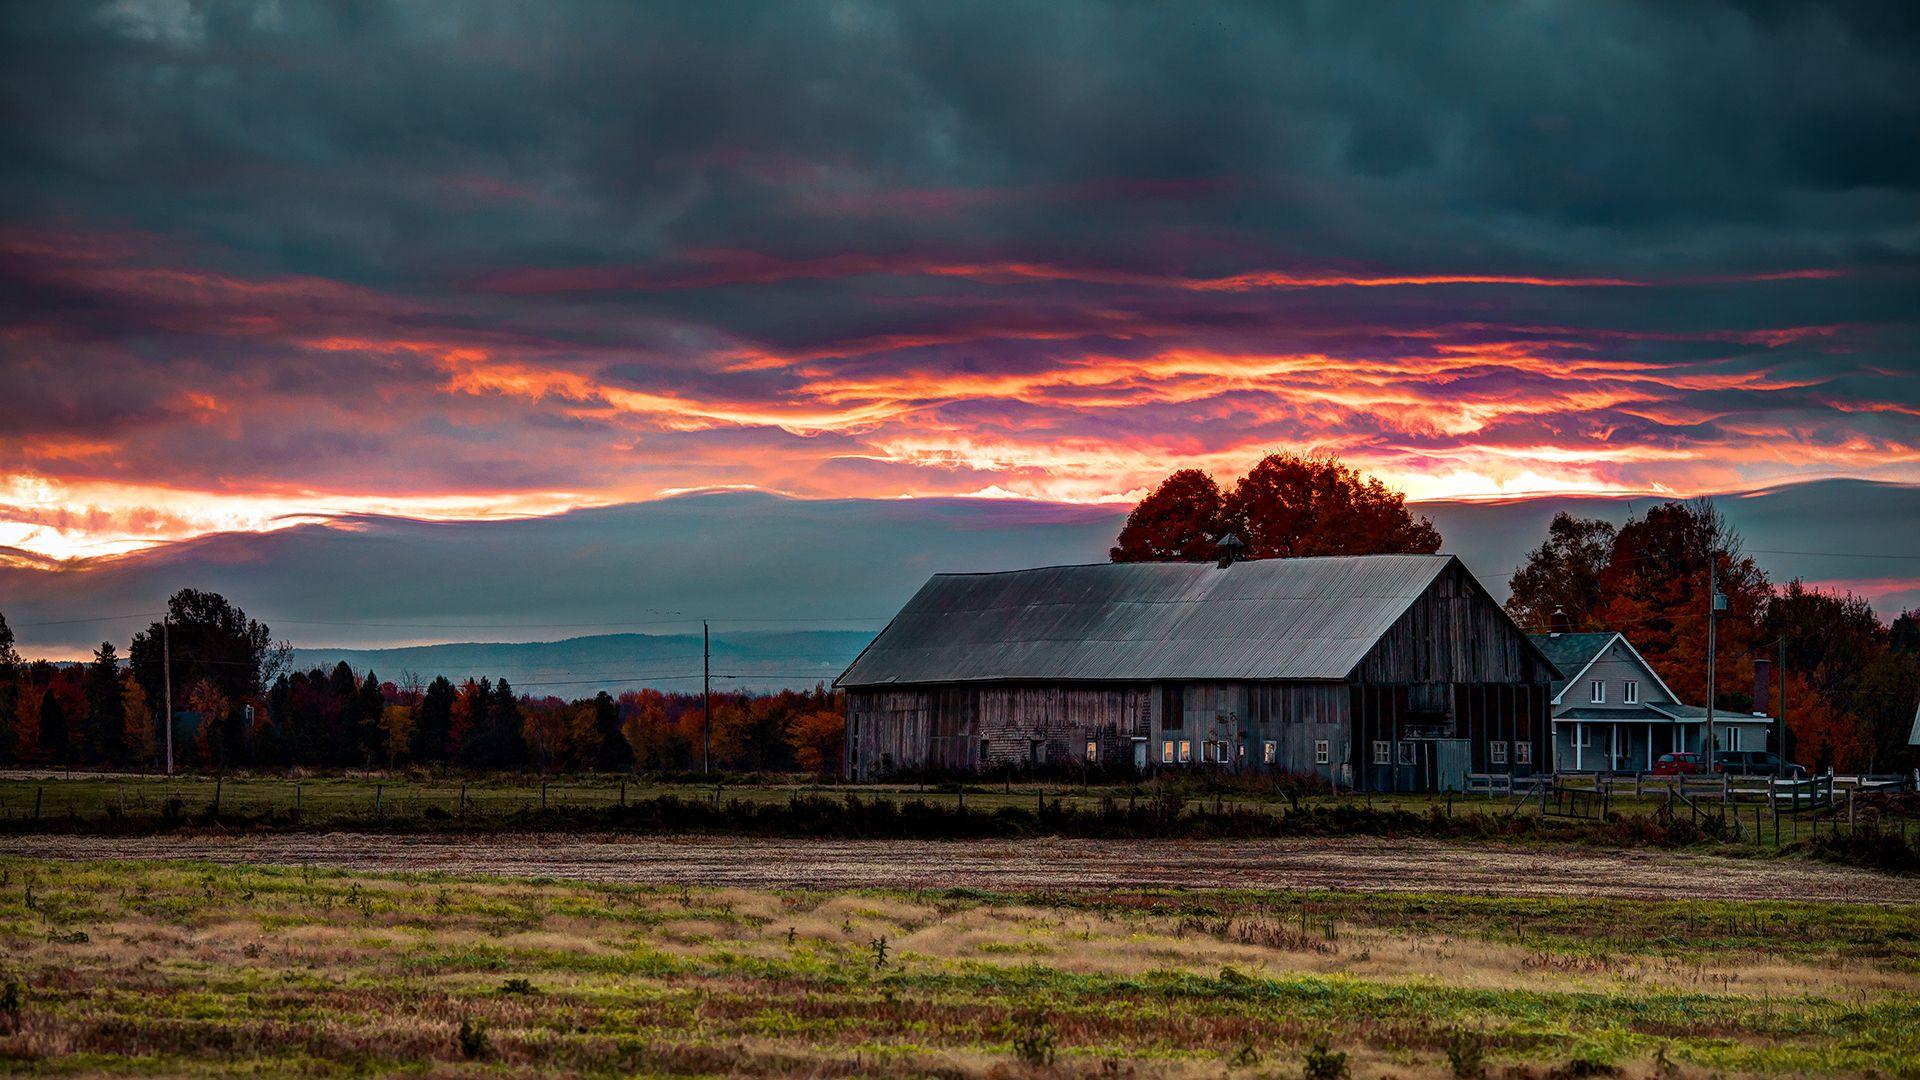 nature landscapes houses barn farm rustic fields trees autumn fall sunset sunrise sky clouds wallpaper. Farmhouse wallpaper, Sunrise wallpaper, Scenery wallpaper